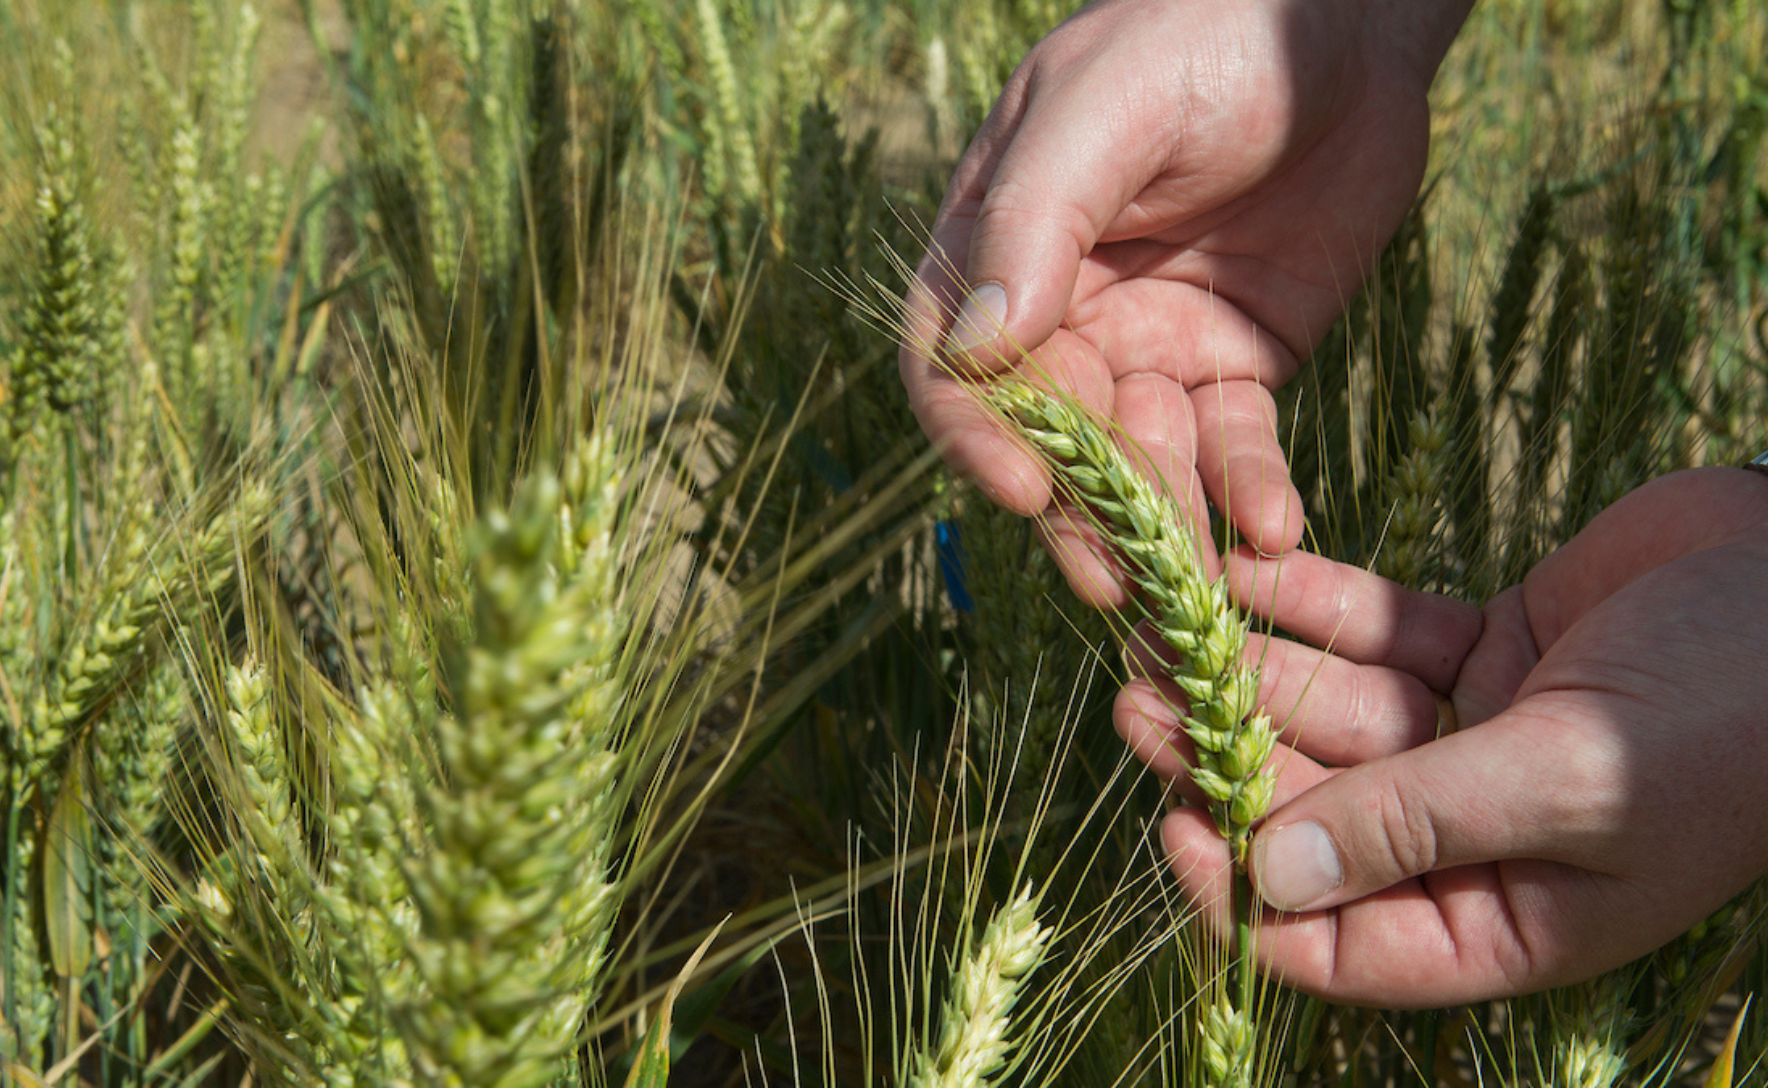 A pair of hands gently holding a wheat stalk, in a wheat field